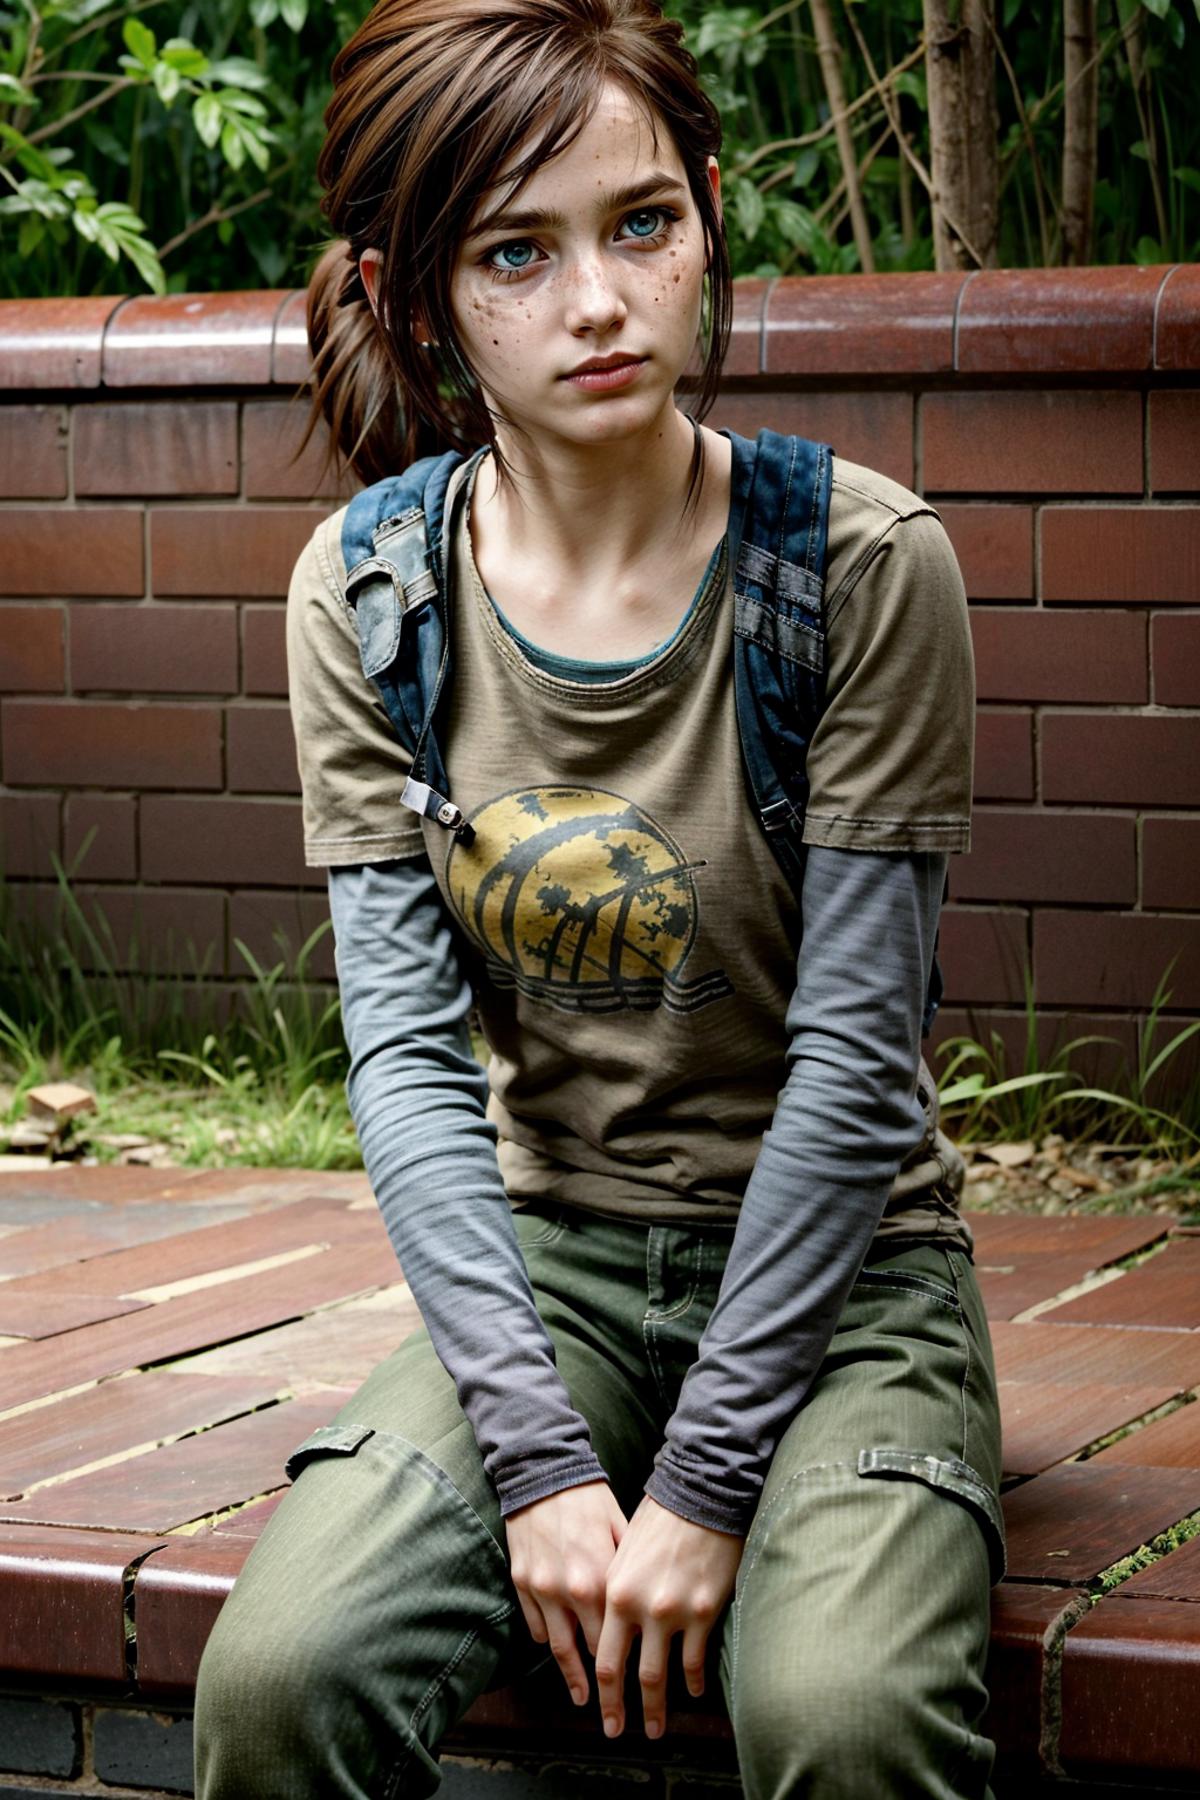 Ellie from The Last of Us image by BloodRedKittie